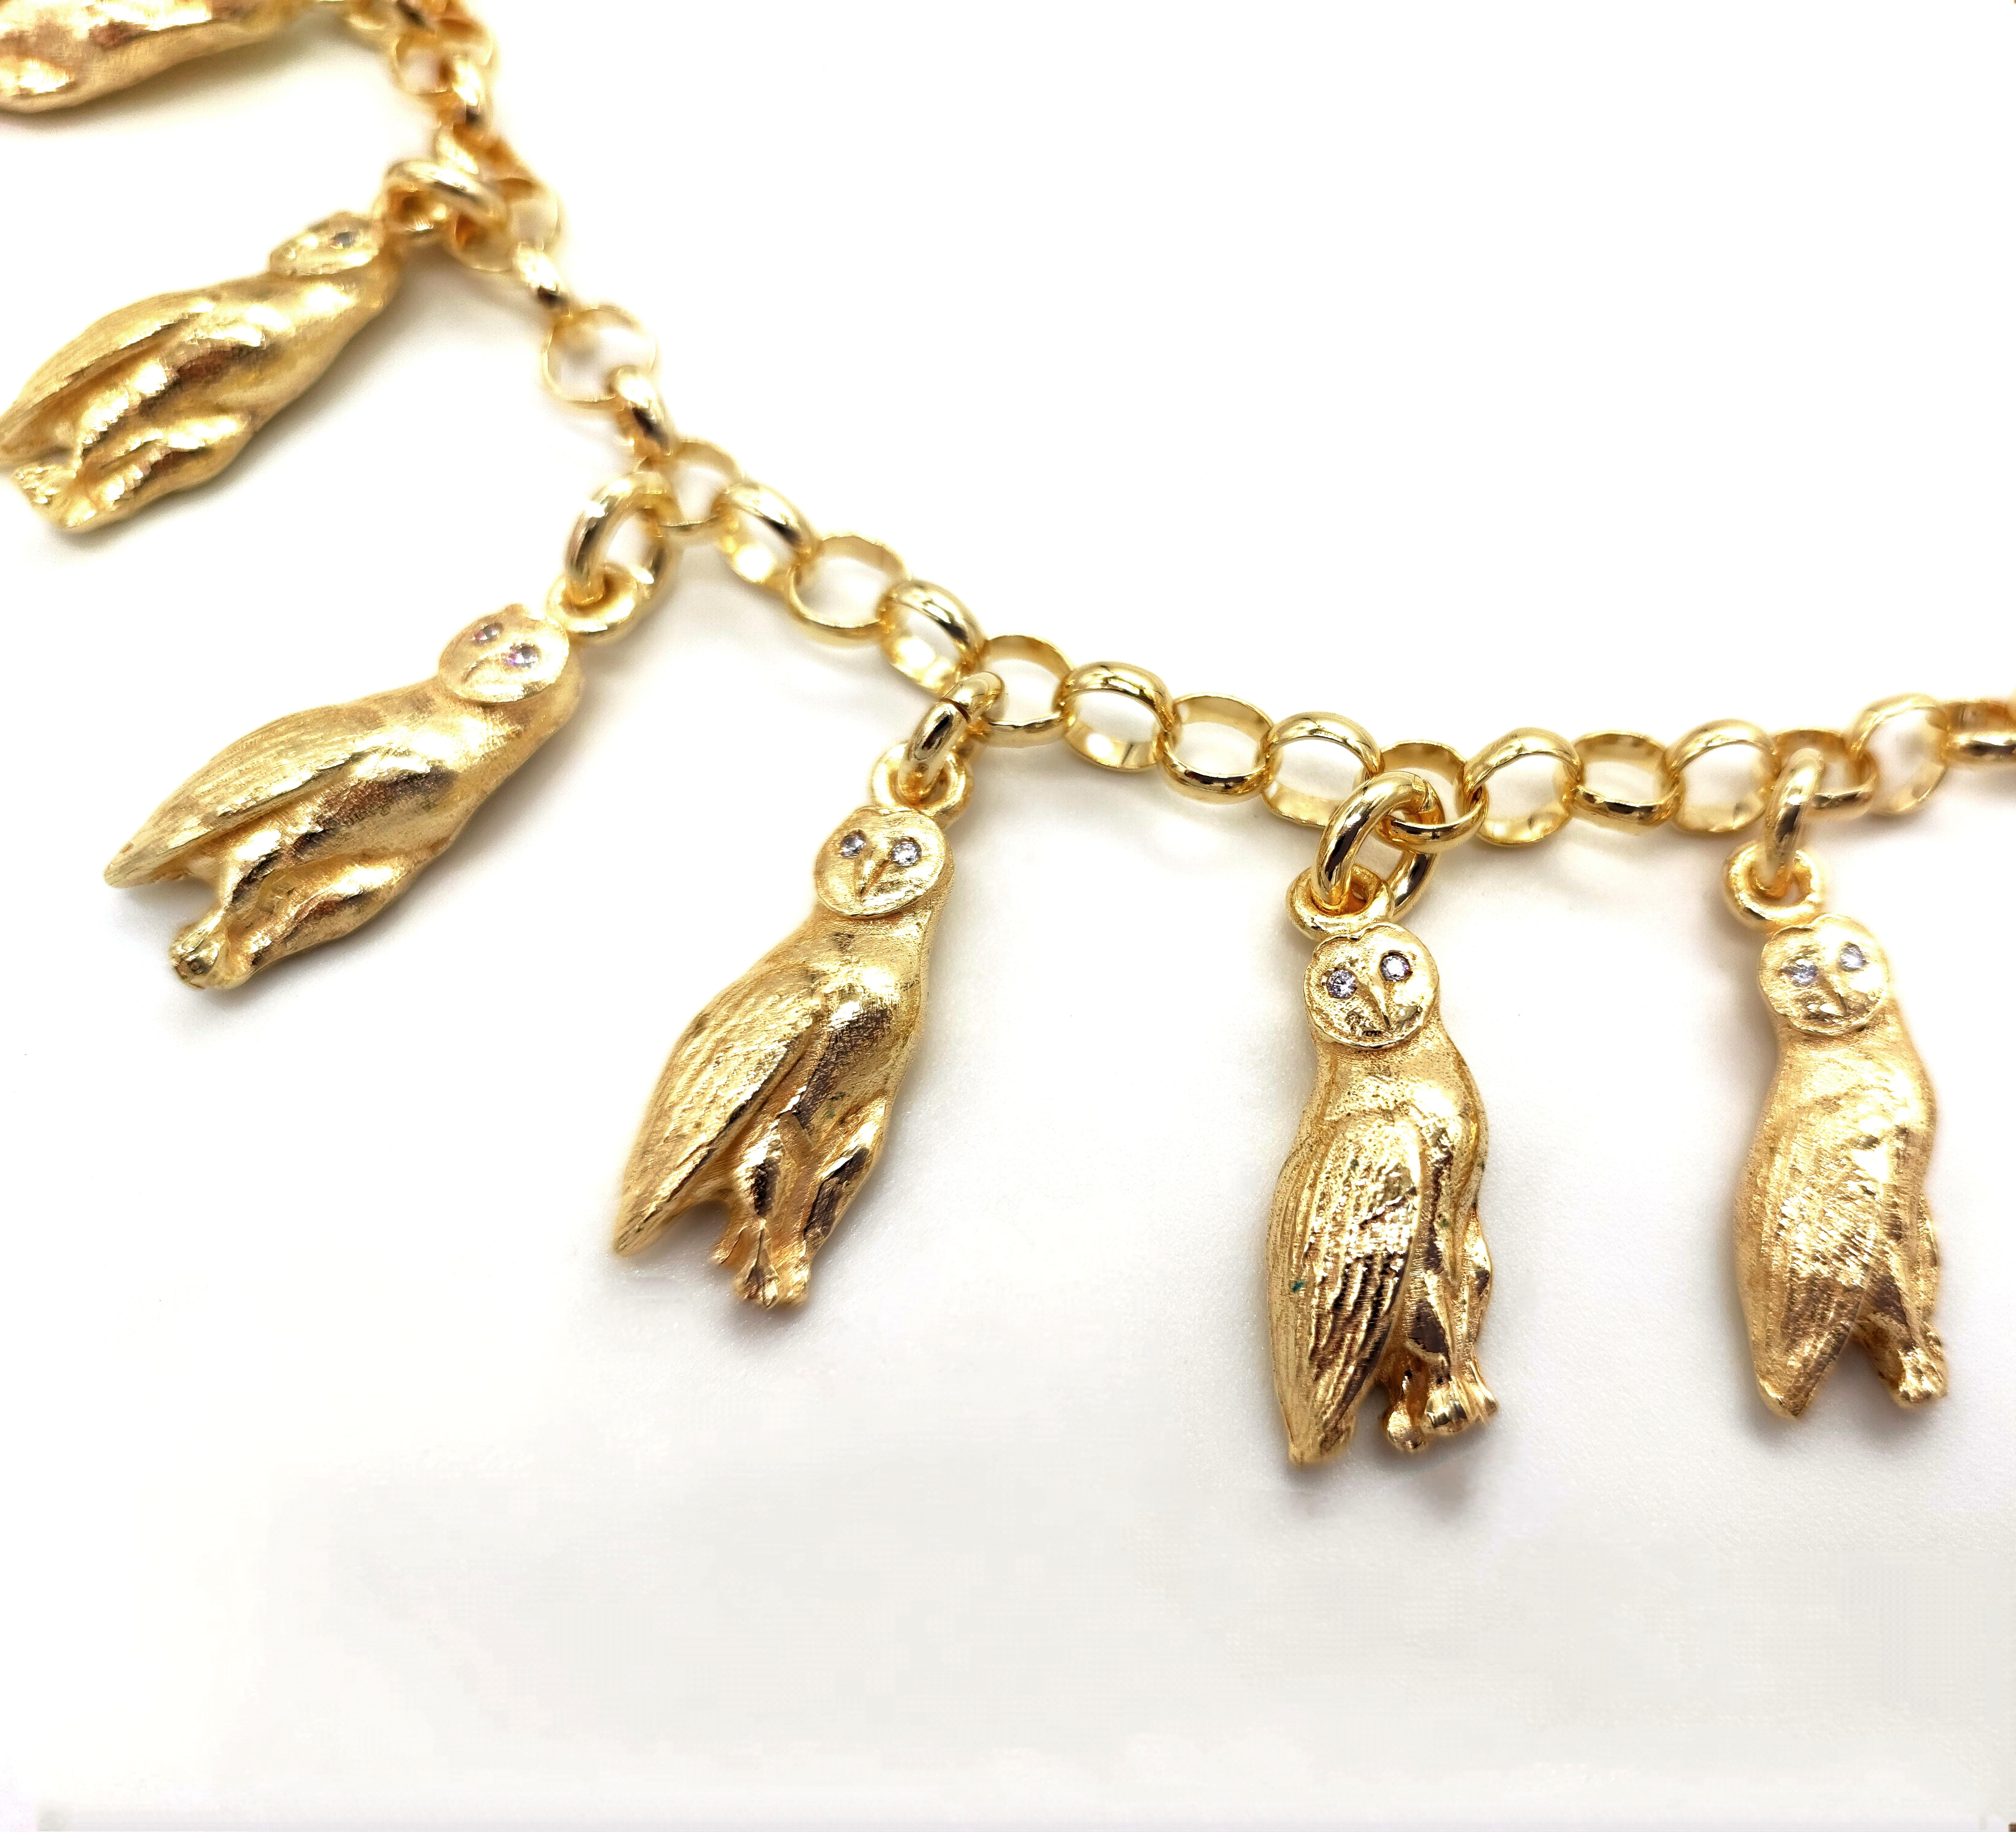 Brilliant Cut Necklace with Barn Owl Pendants in 14 Karat Solid Gold and Diamonds For Sale